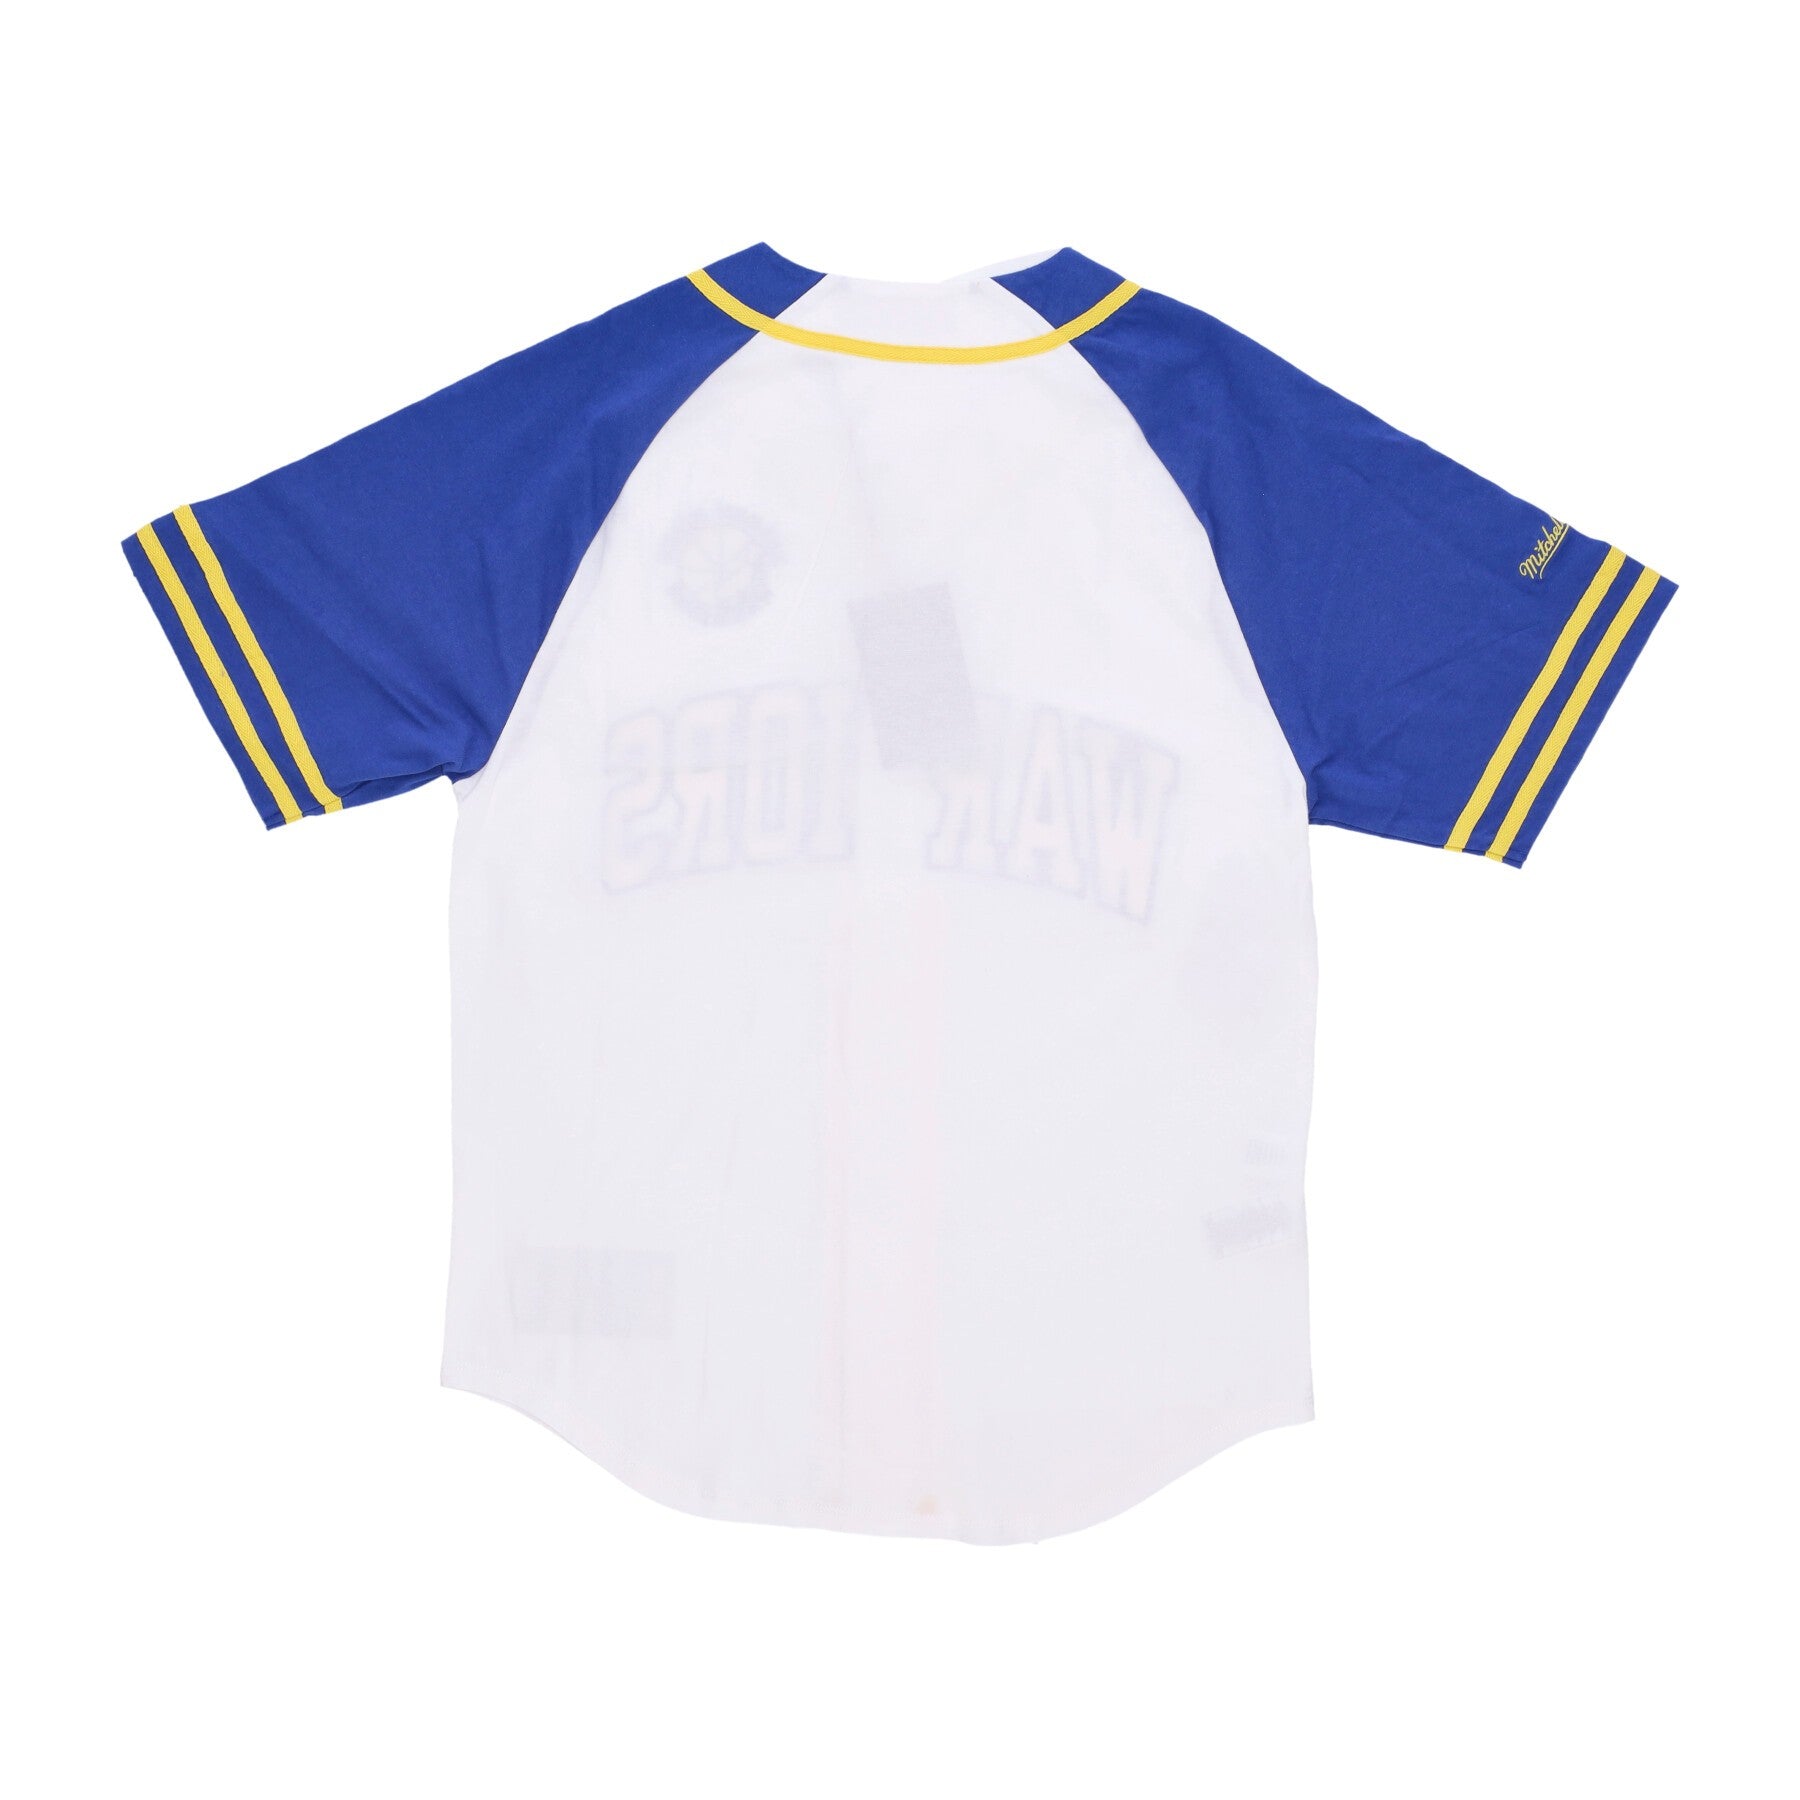 Mitchell & Ness, Casacca Bottoni Uomo Nba Practice Day Button Front Jersey Hardwood Classics Golwar, 